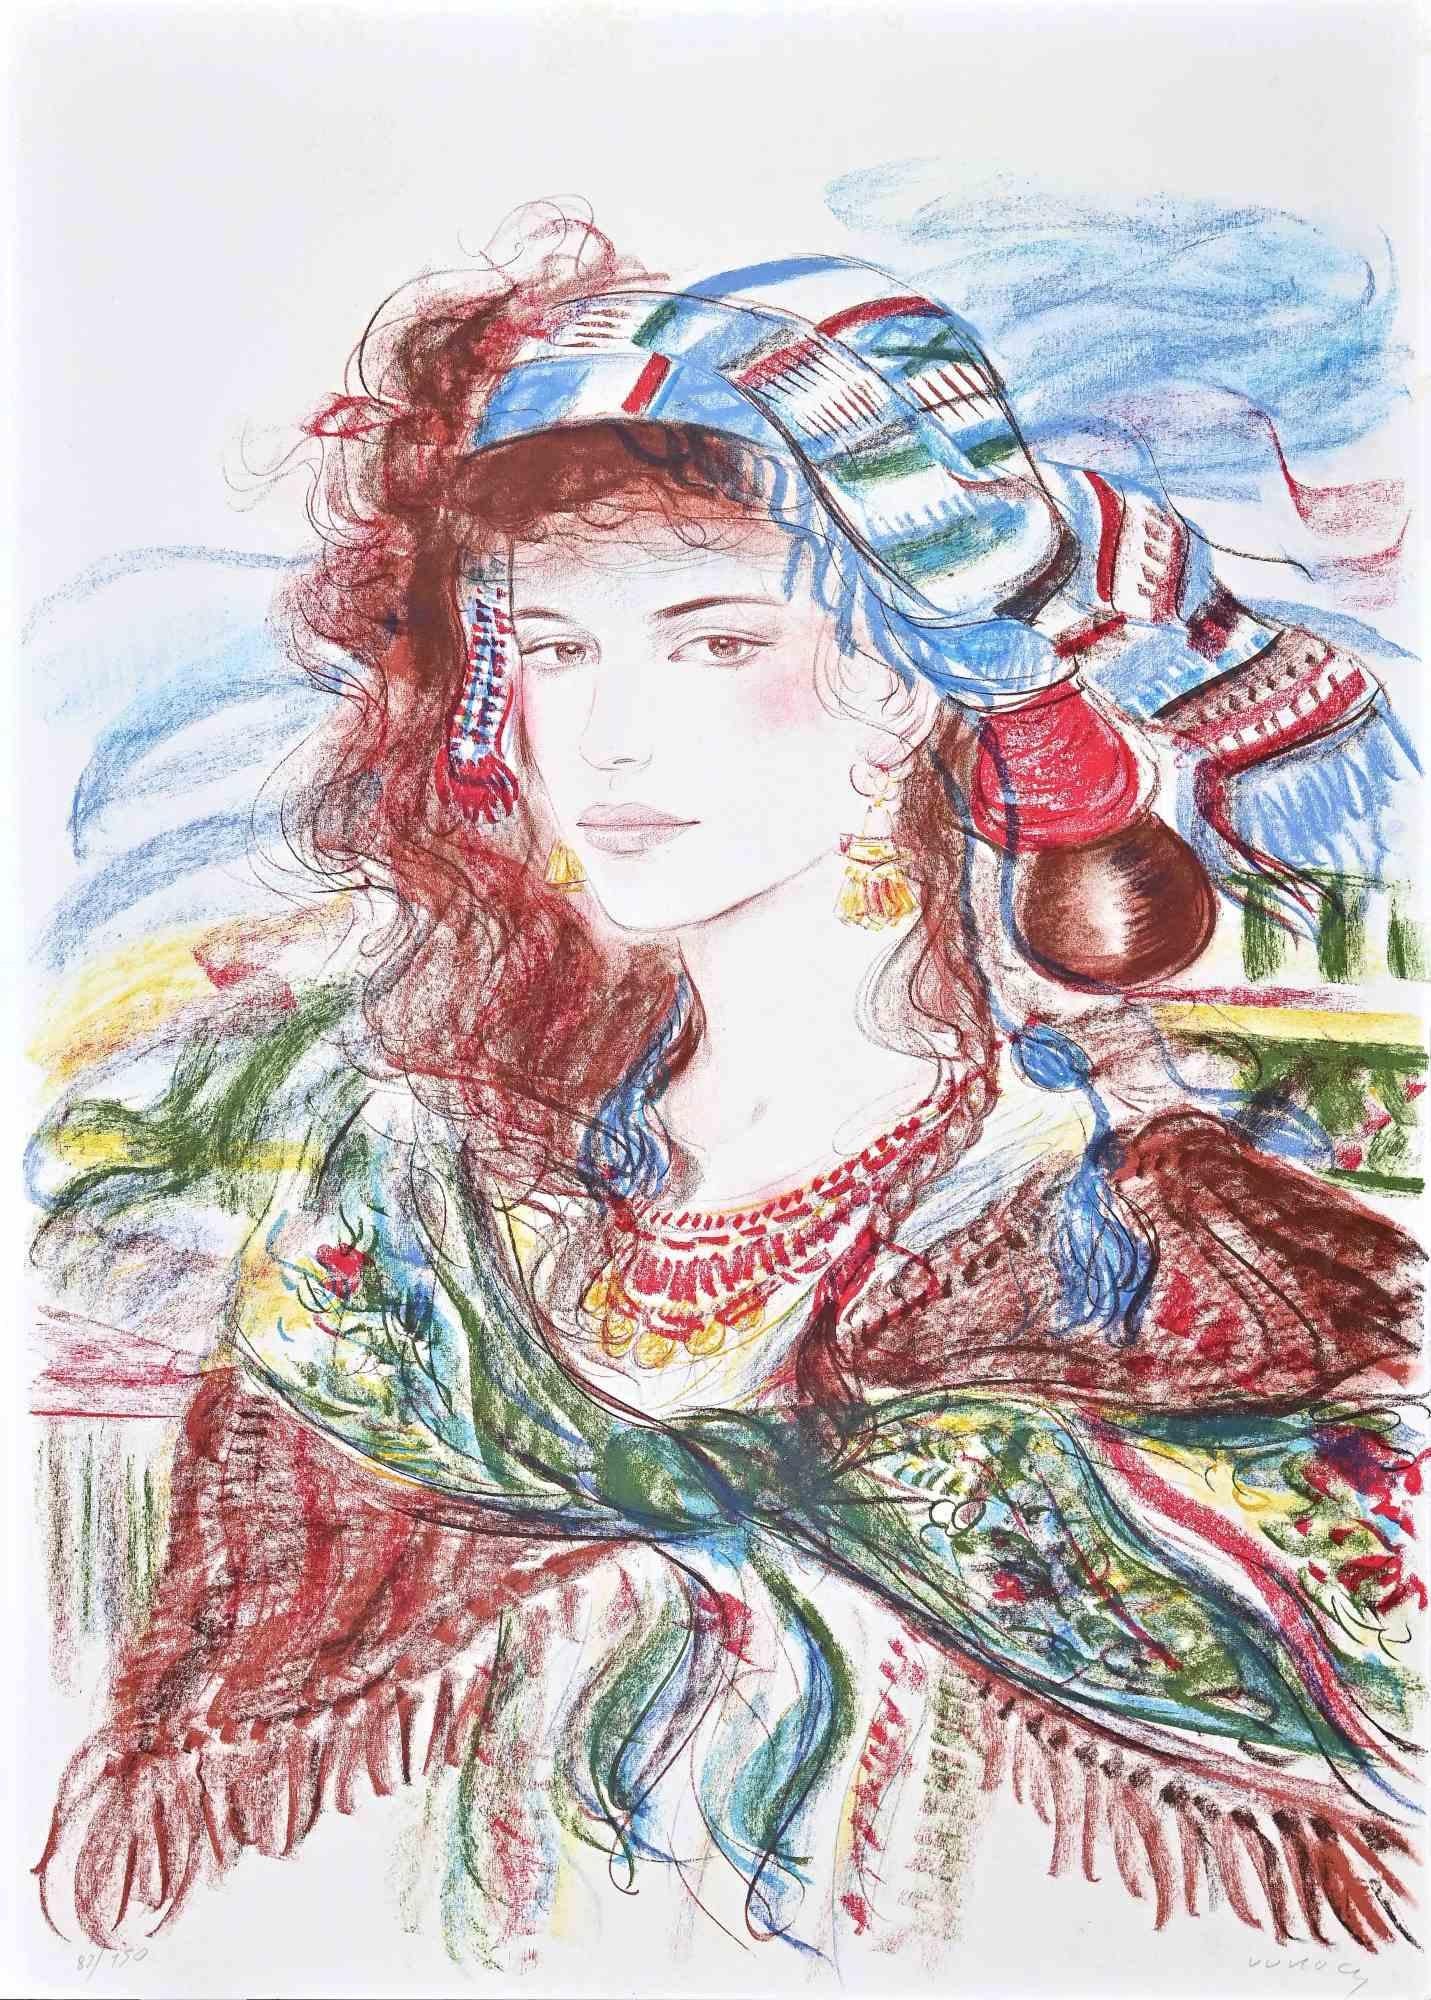 Gypsy -  Lithograph by Jovan Vulic - 1980s